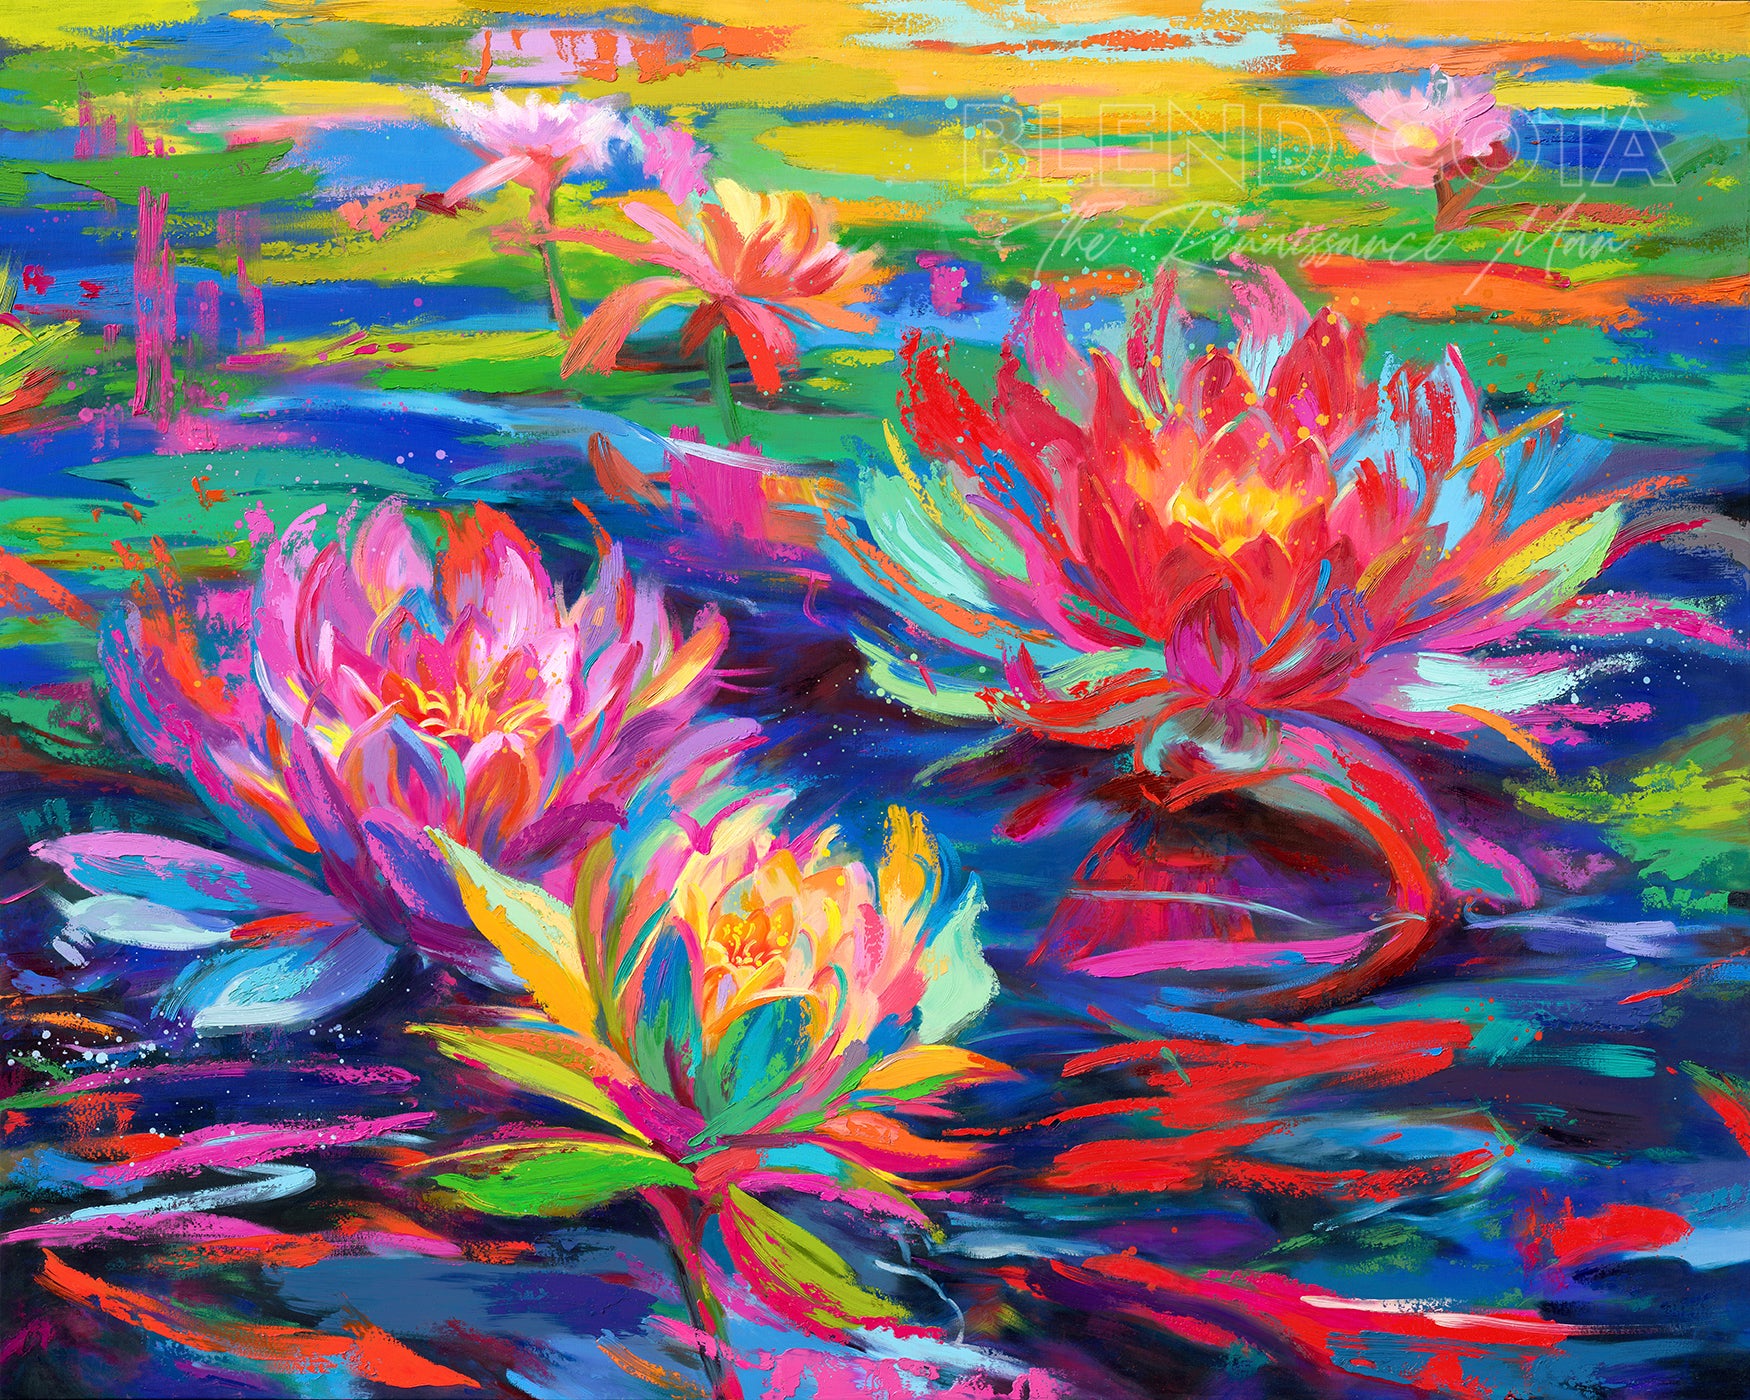 Limited edition painting on canvas of red, pink and yellow water lilies blooming in a pond of lily pads, abundant and vibrant flowers in colorful brushstrokes, color expressionism style.